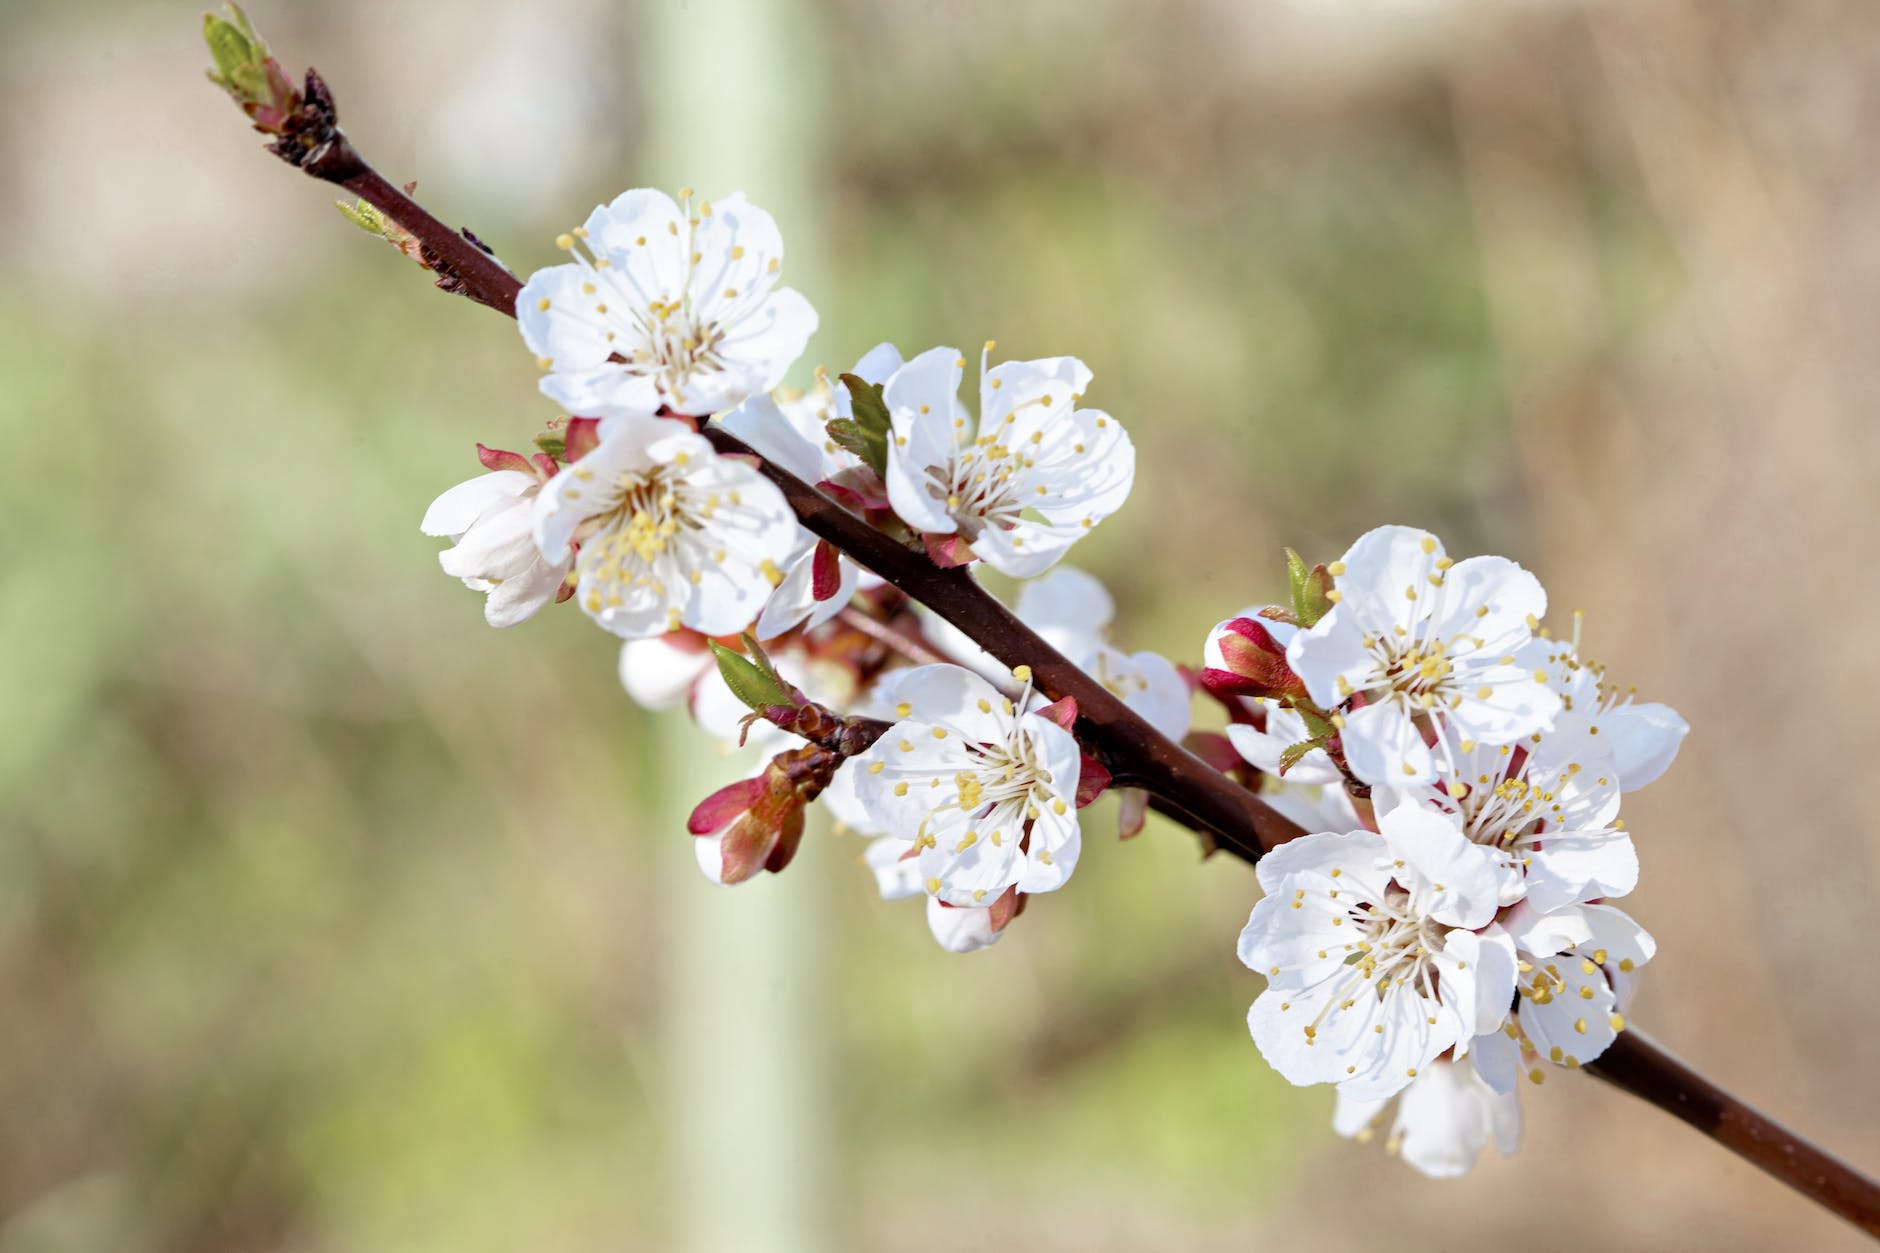 blooming apricot tree twig in garden on sunny day